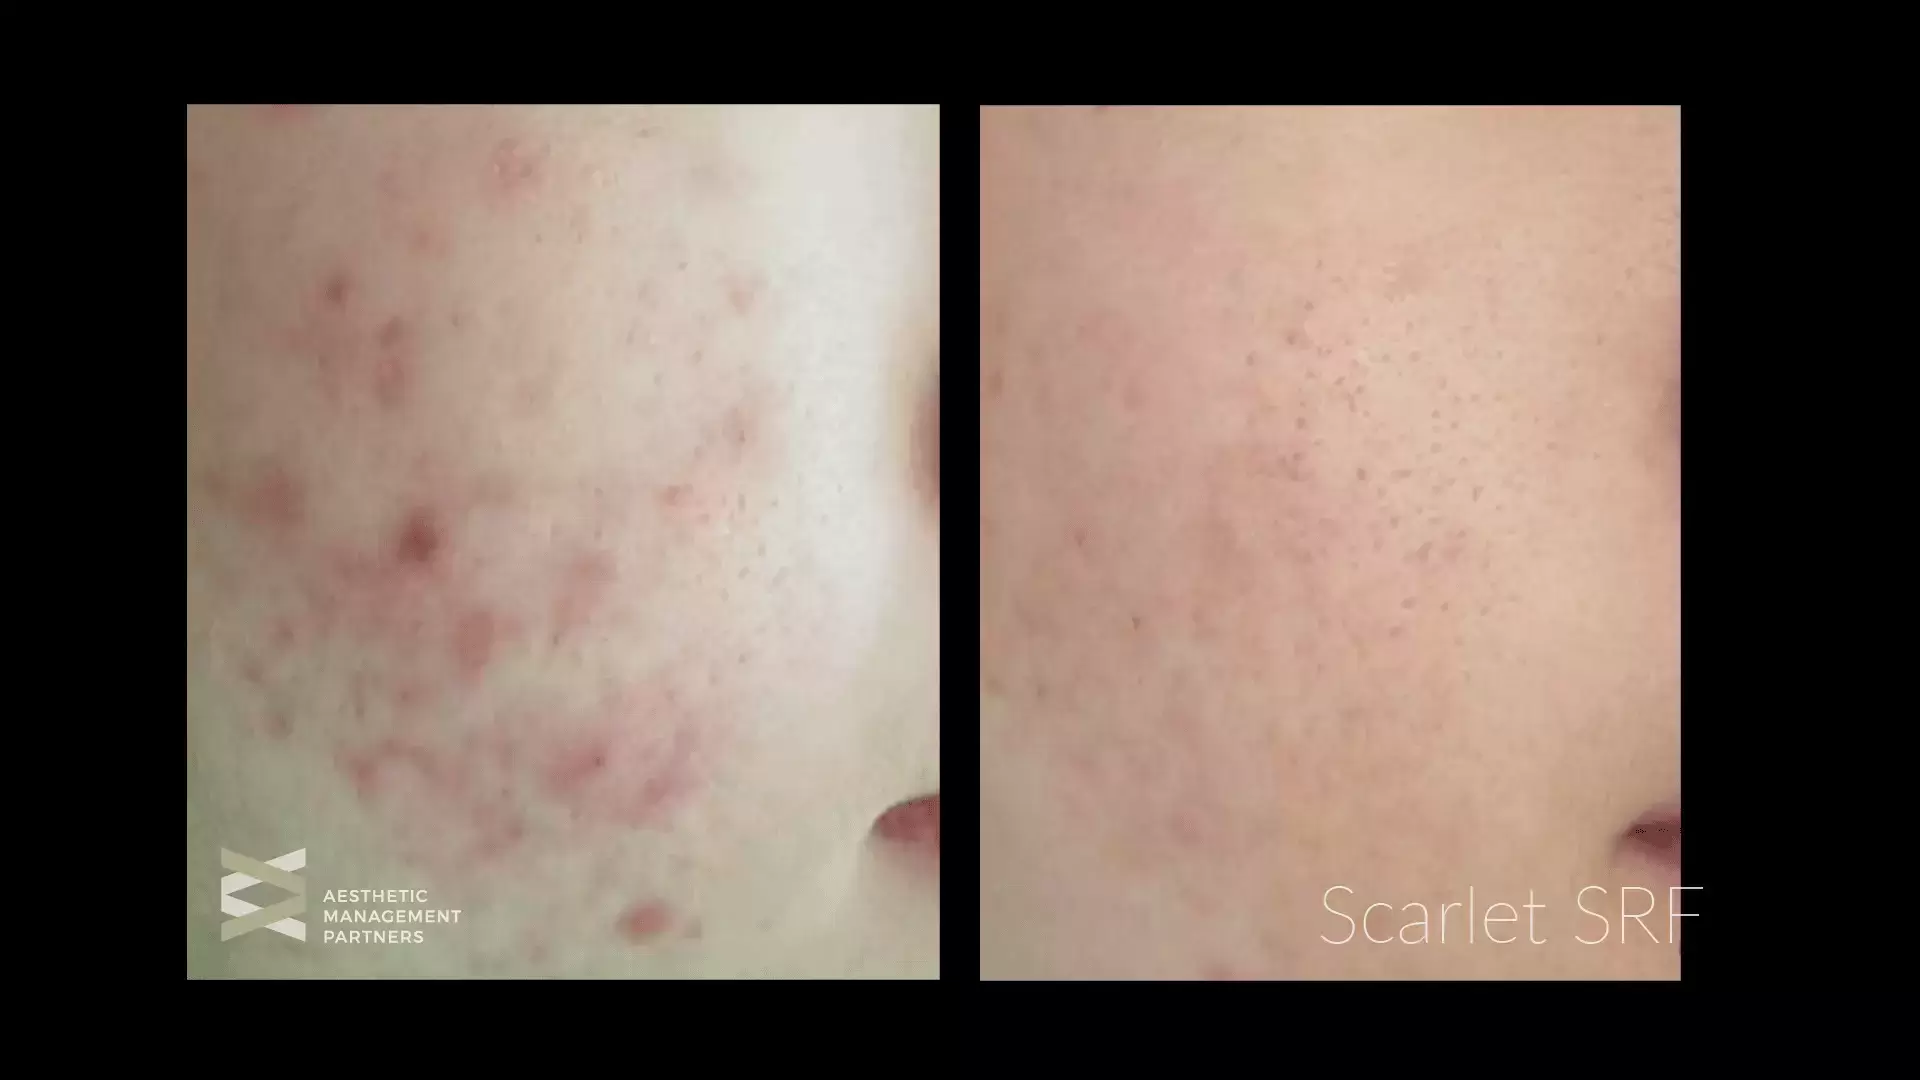 Scarlet Acne - Aesthetic Management Partners - Medical Aesthetics Equipment For The Modern Practice